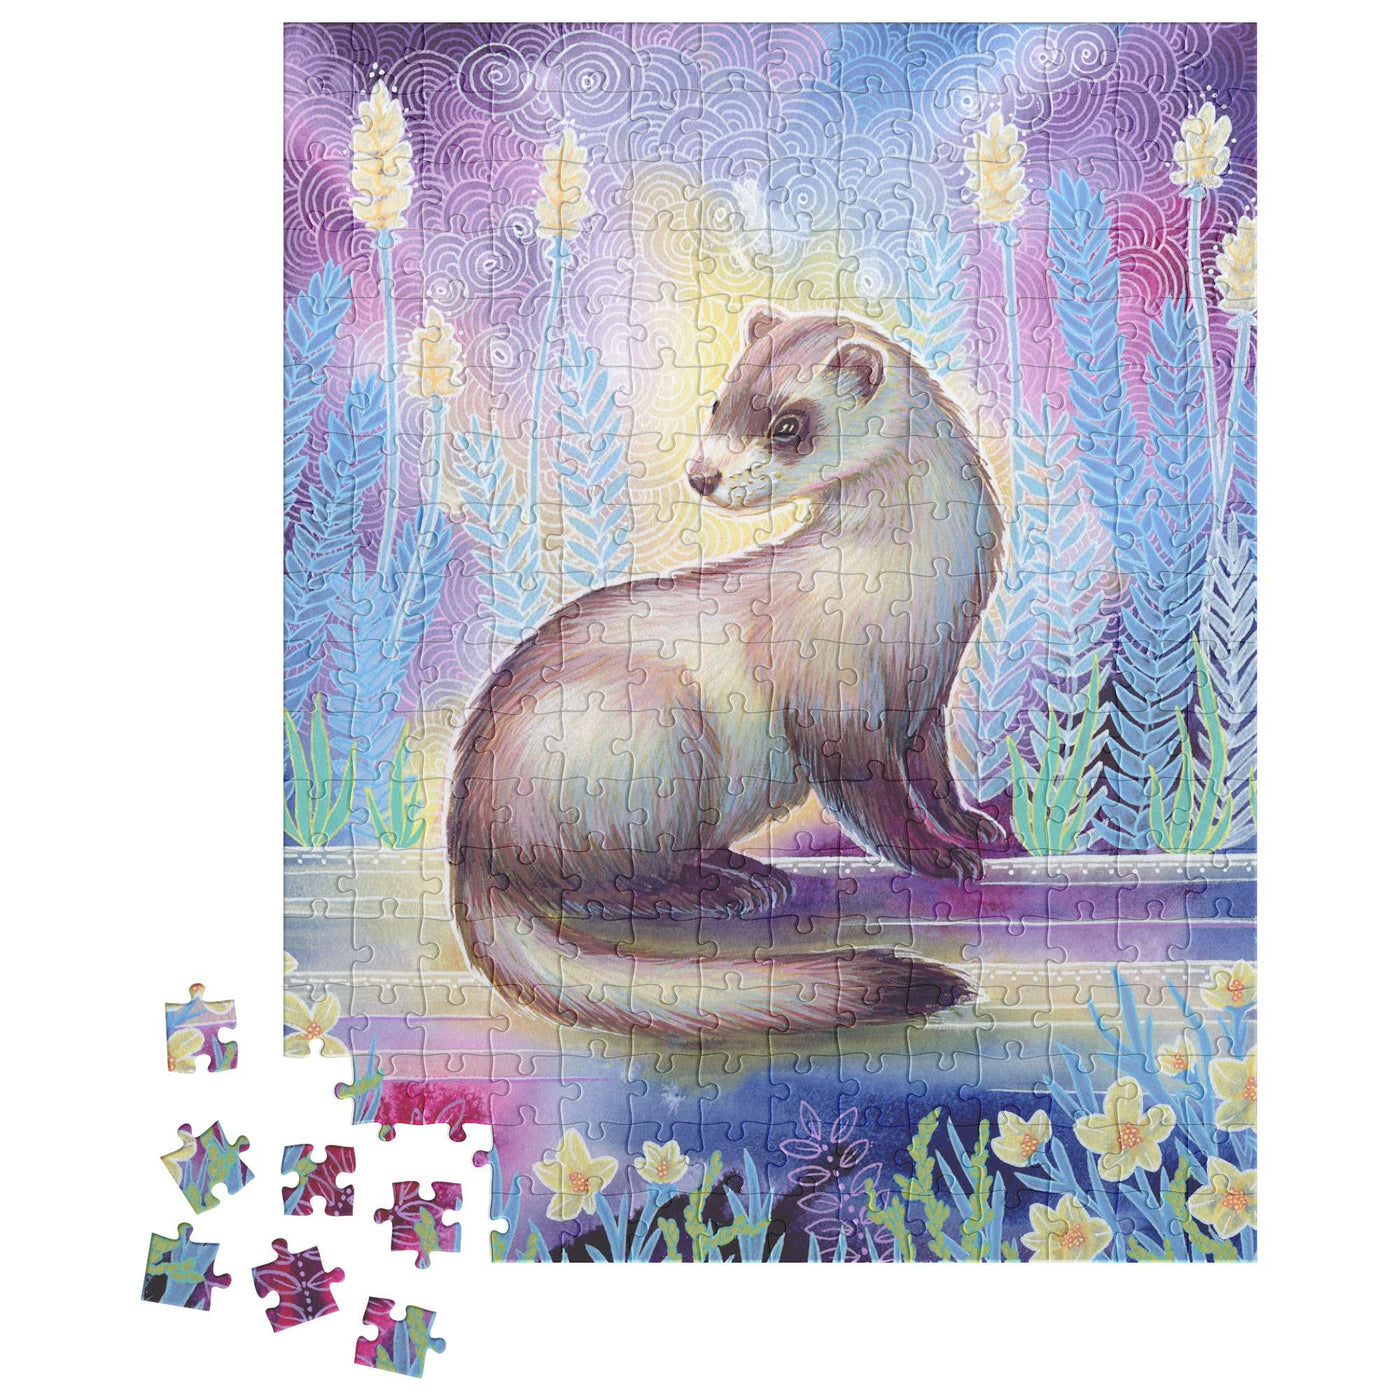 A completed Ferret Puzzle depicting a weasel among purple and yellow flowers, with a few disconnected pieces in the lower left corner.